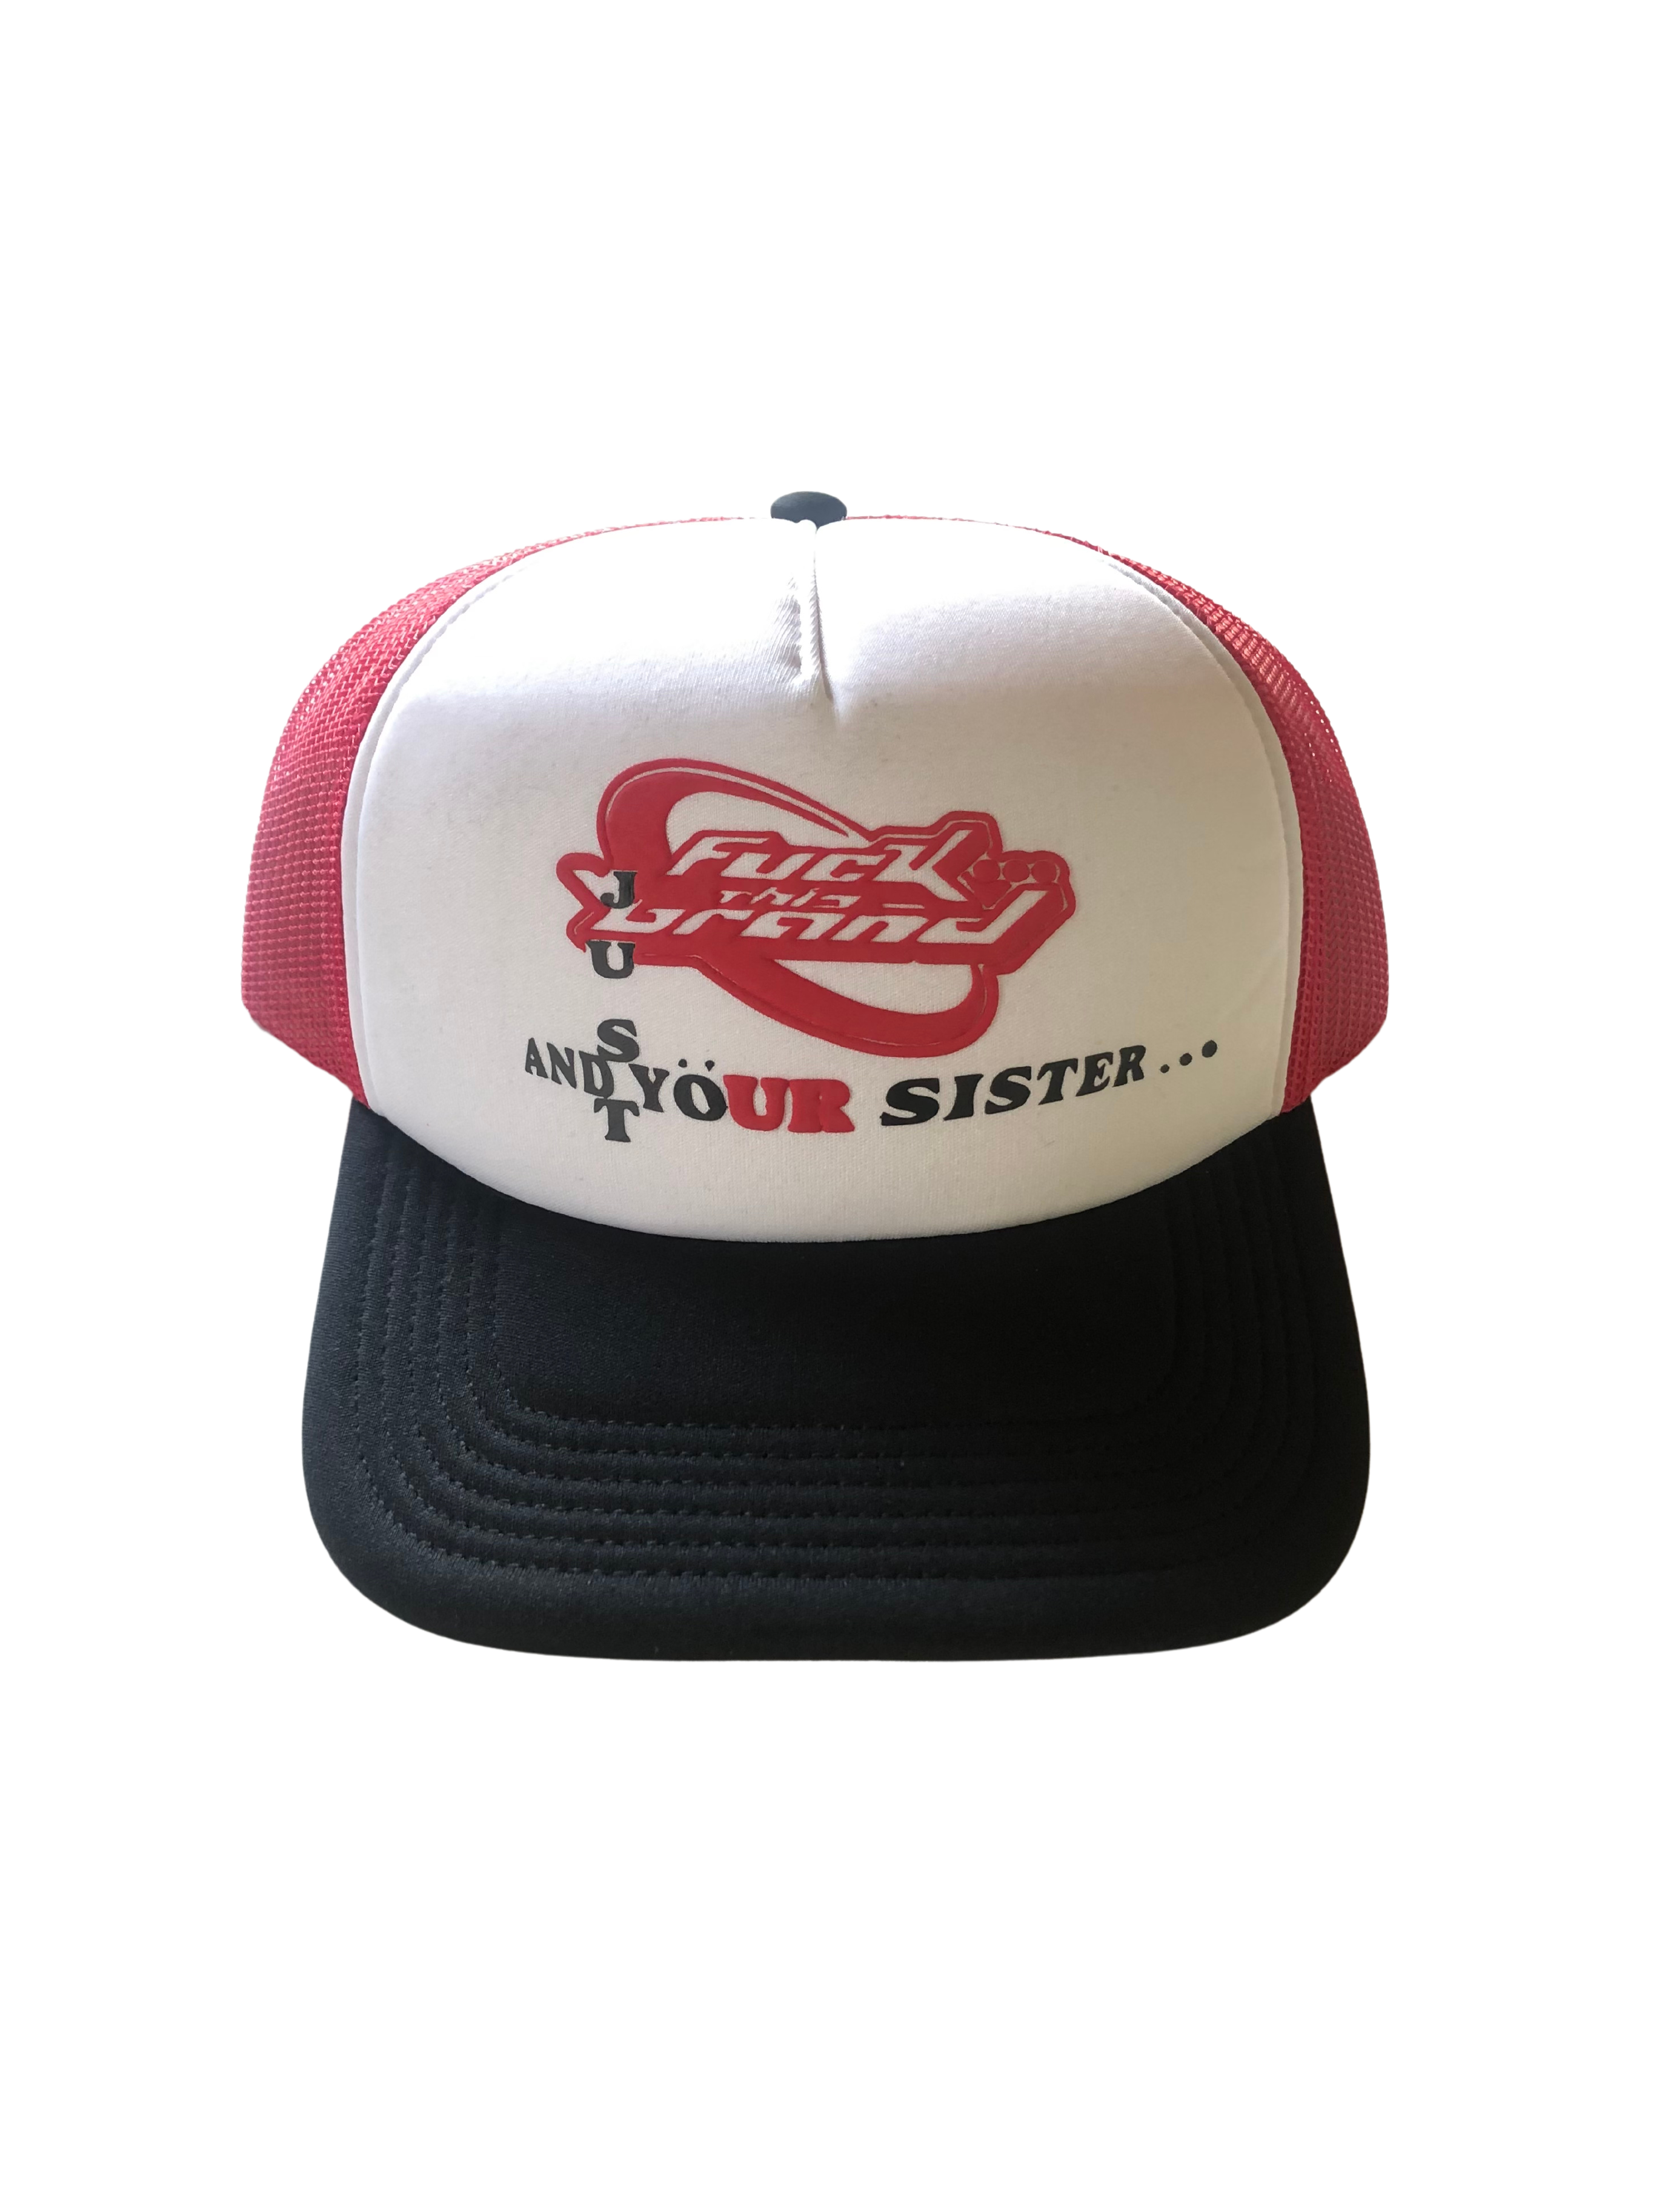 FVCKTHISBRAND a Trucker Hat White/Red (PUFFY PRINT)